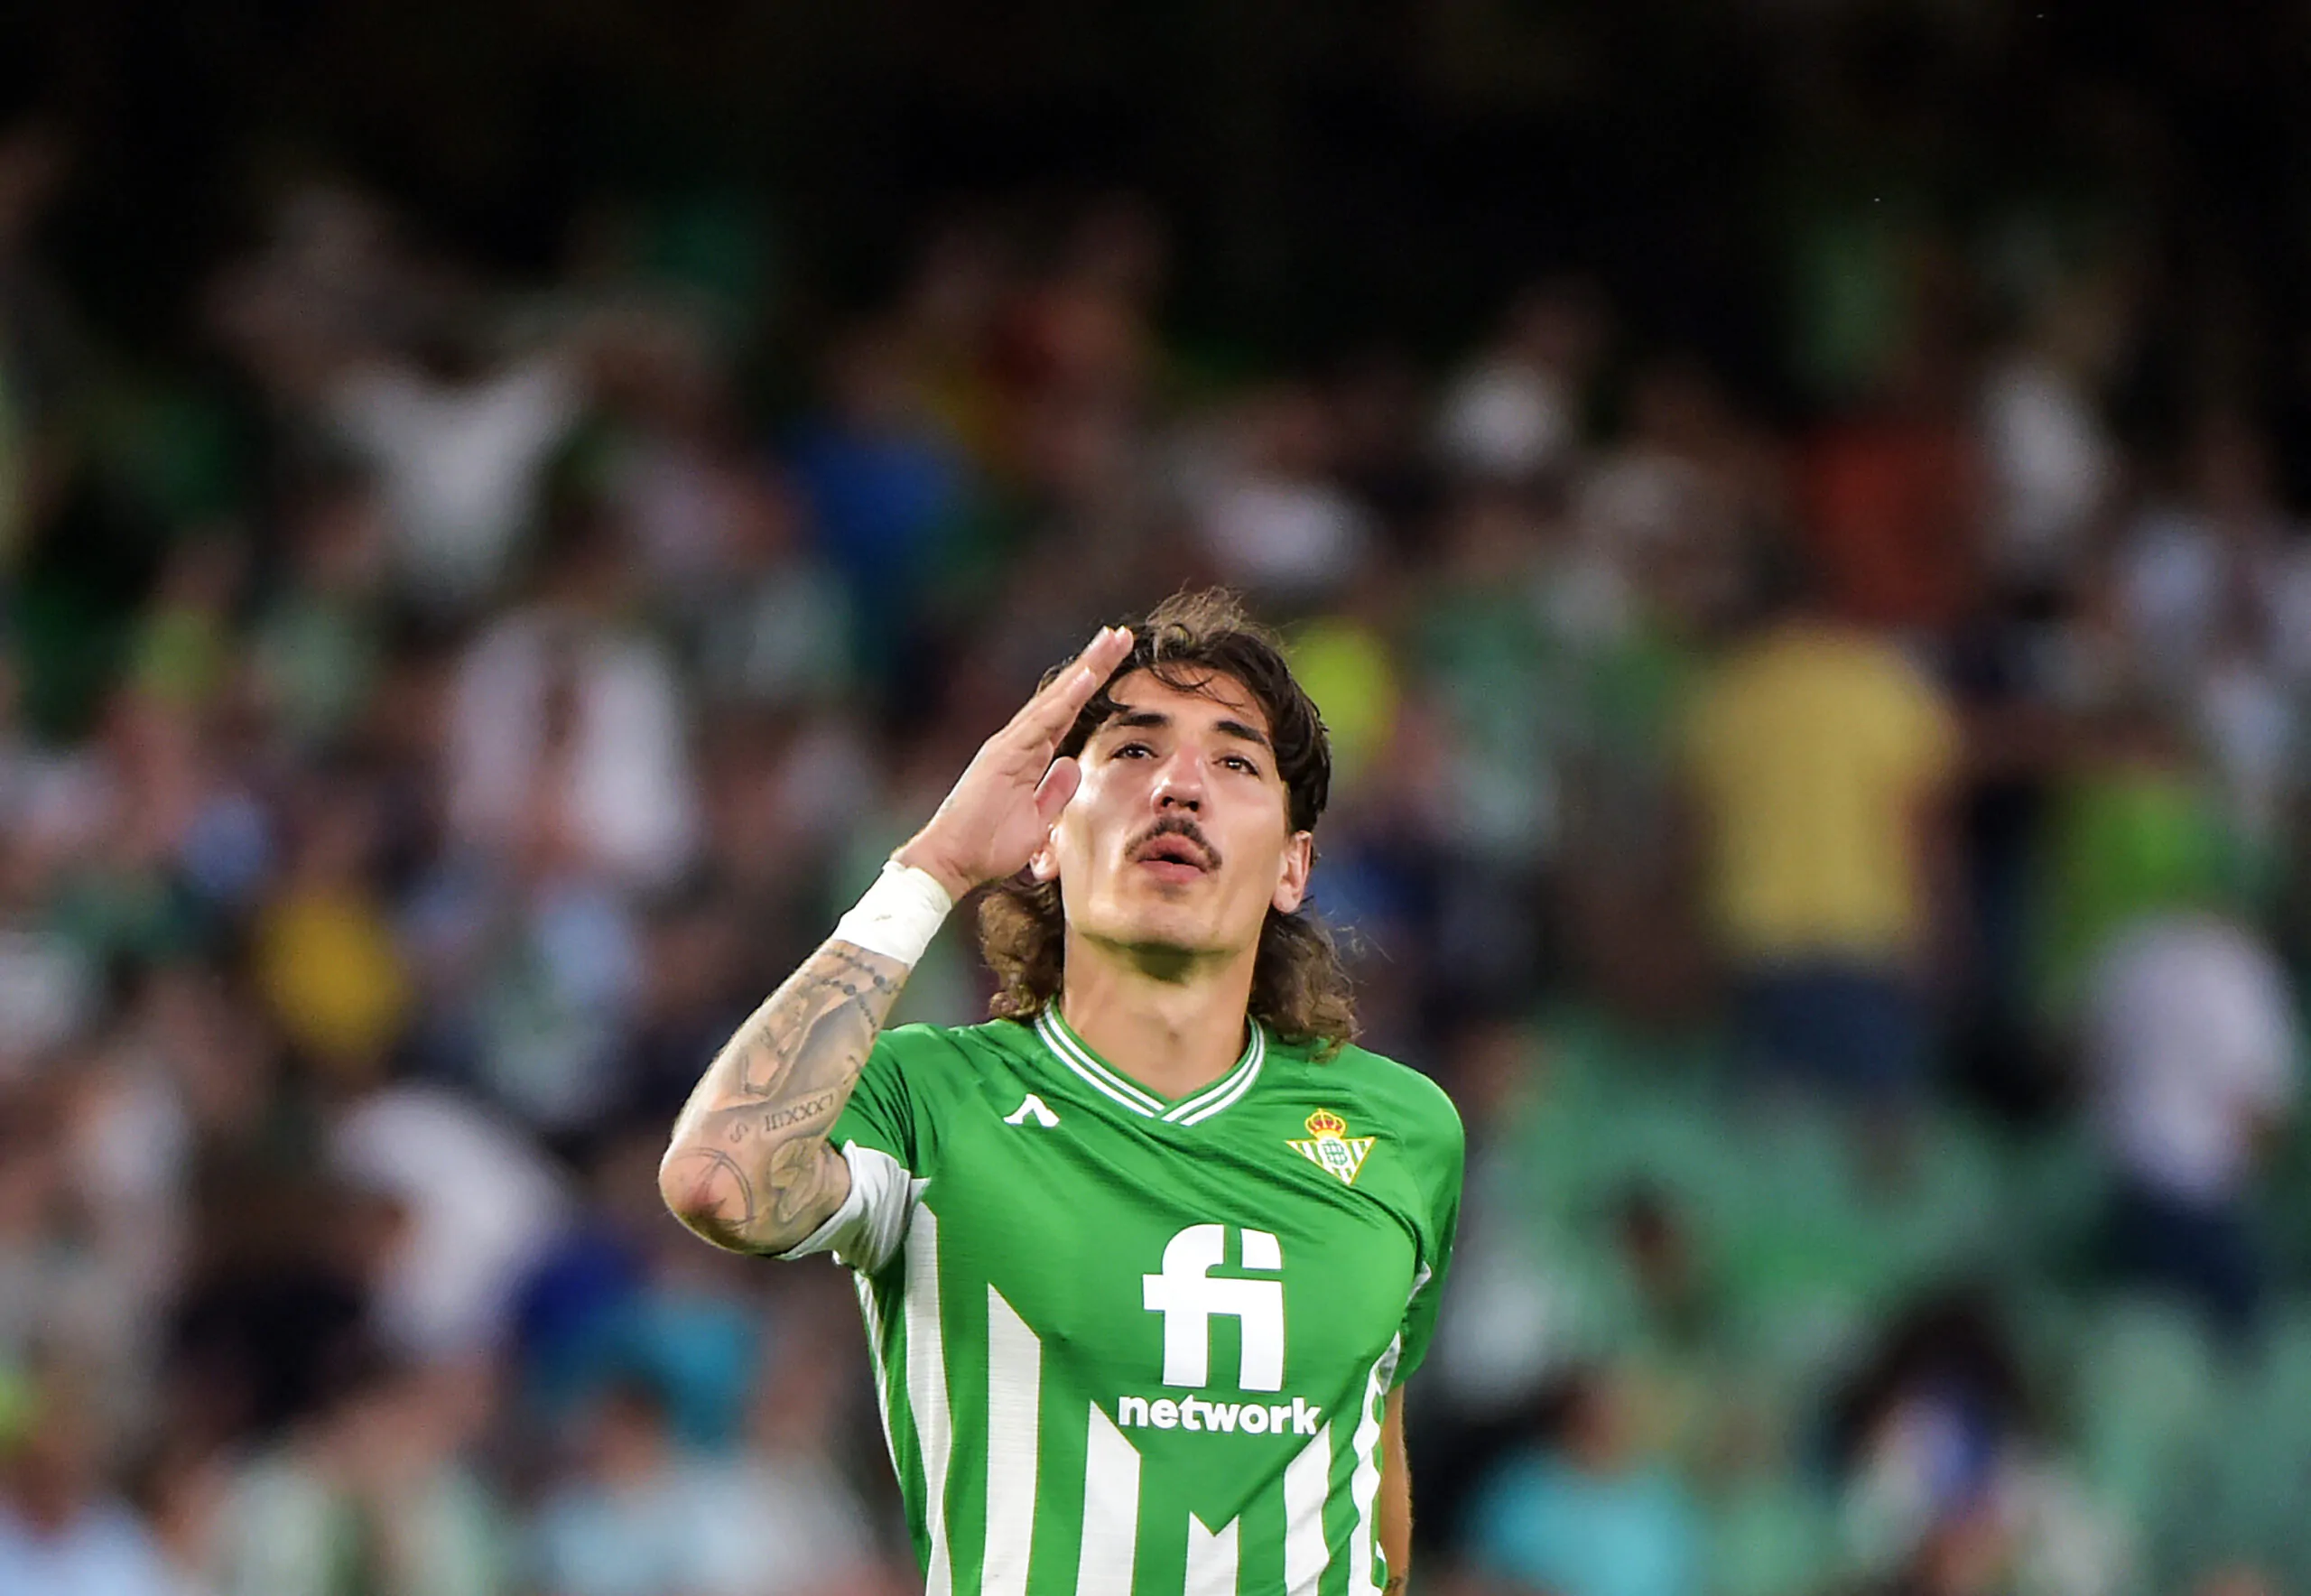 Hector Bellerin is back in London following a loan spell at Betis, at least for a while. Serie A clubs could target him if his previous side not retain him.